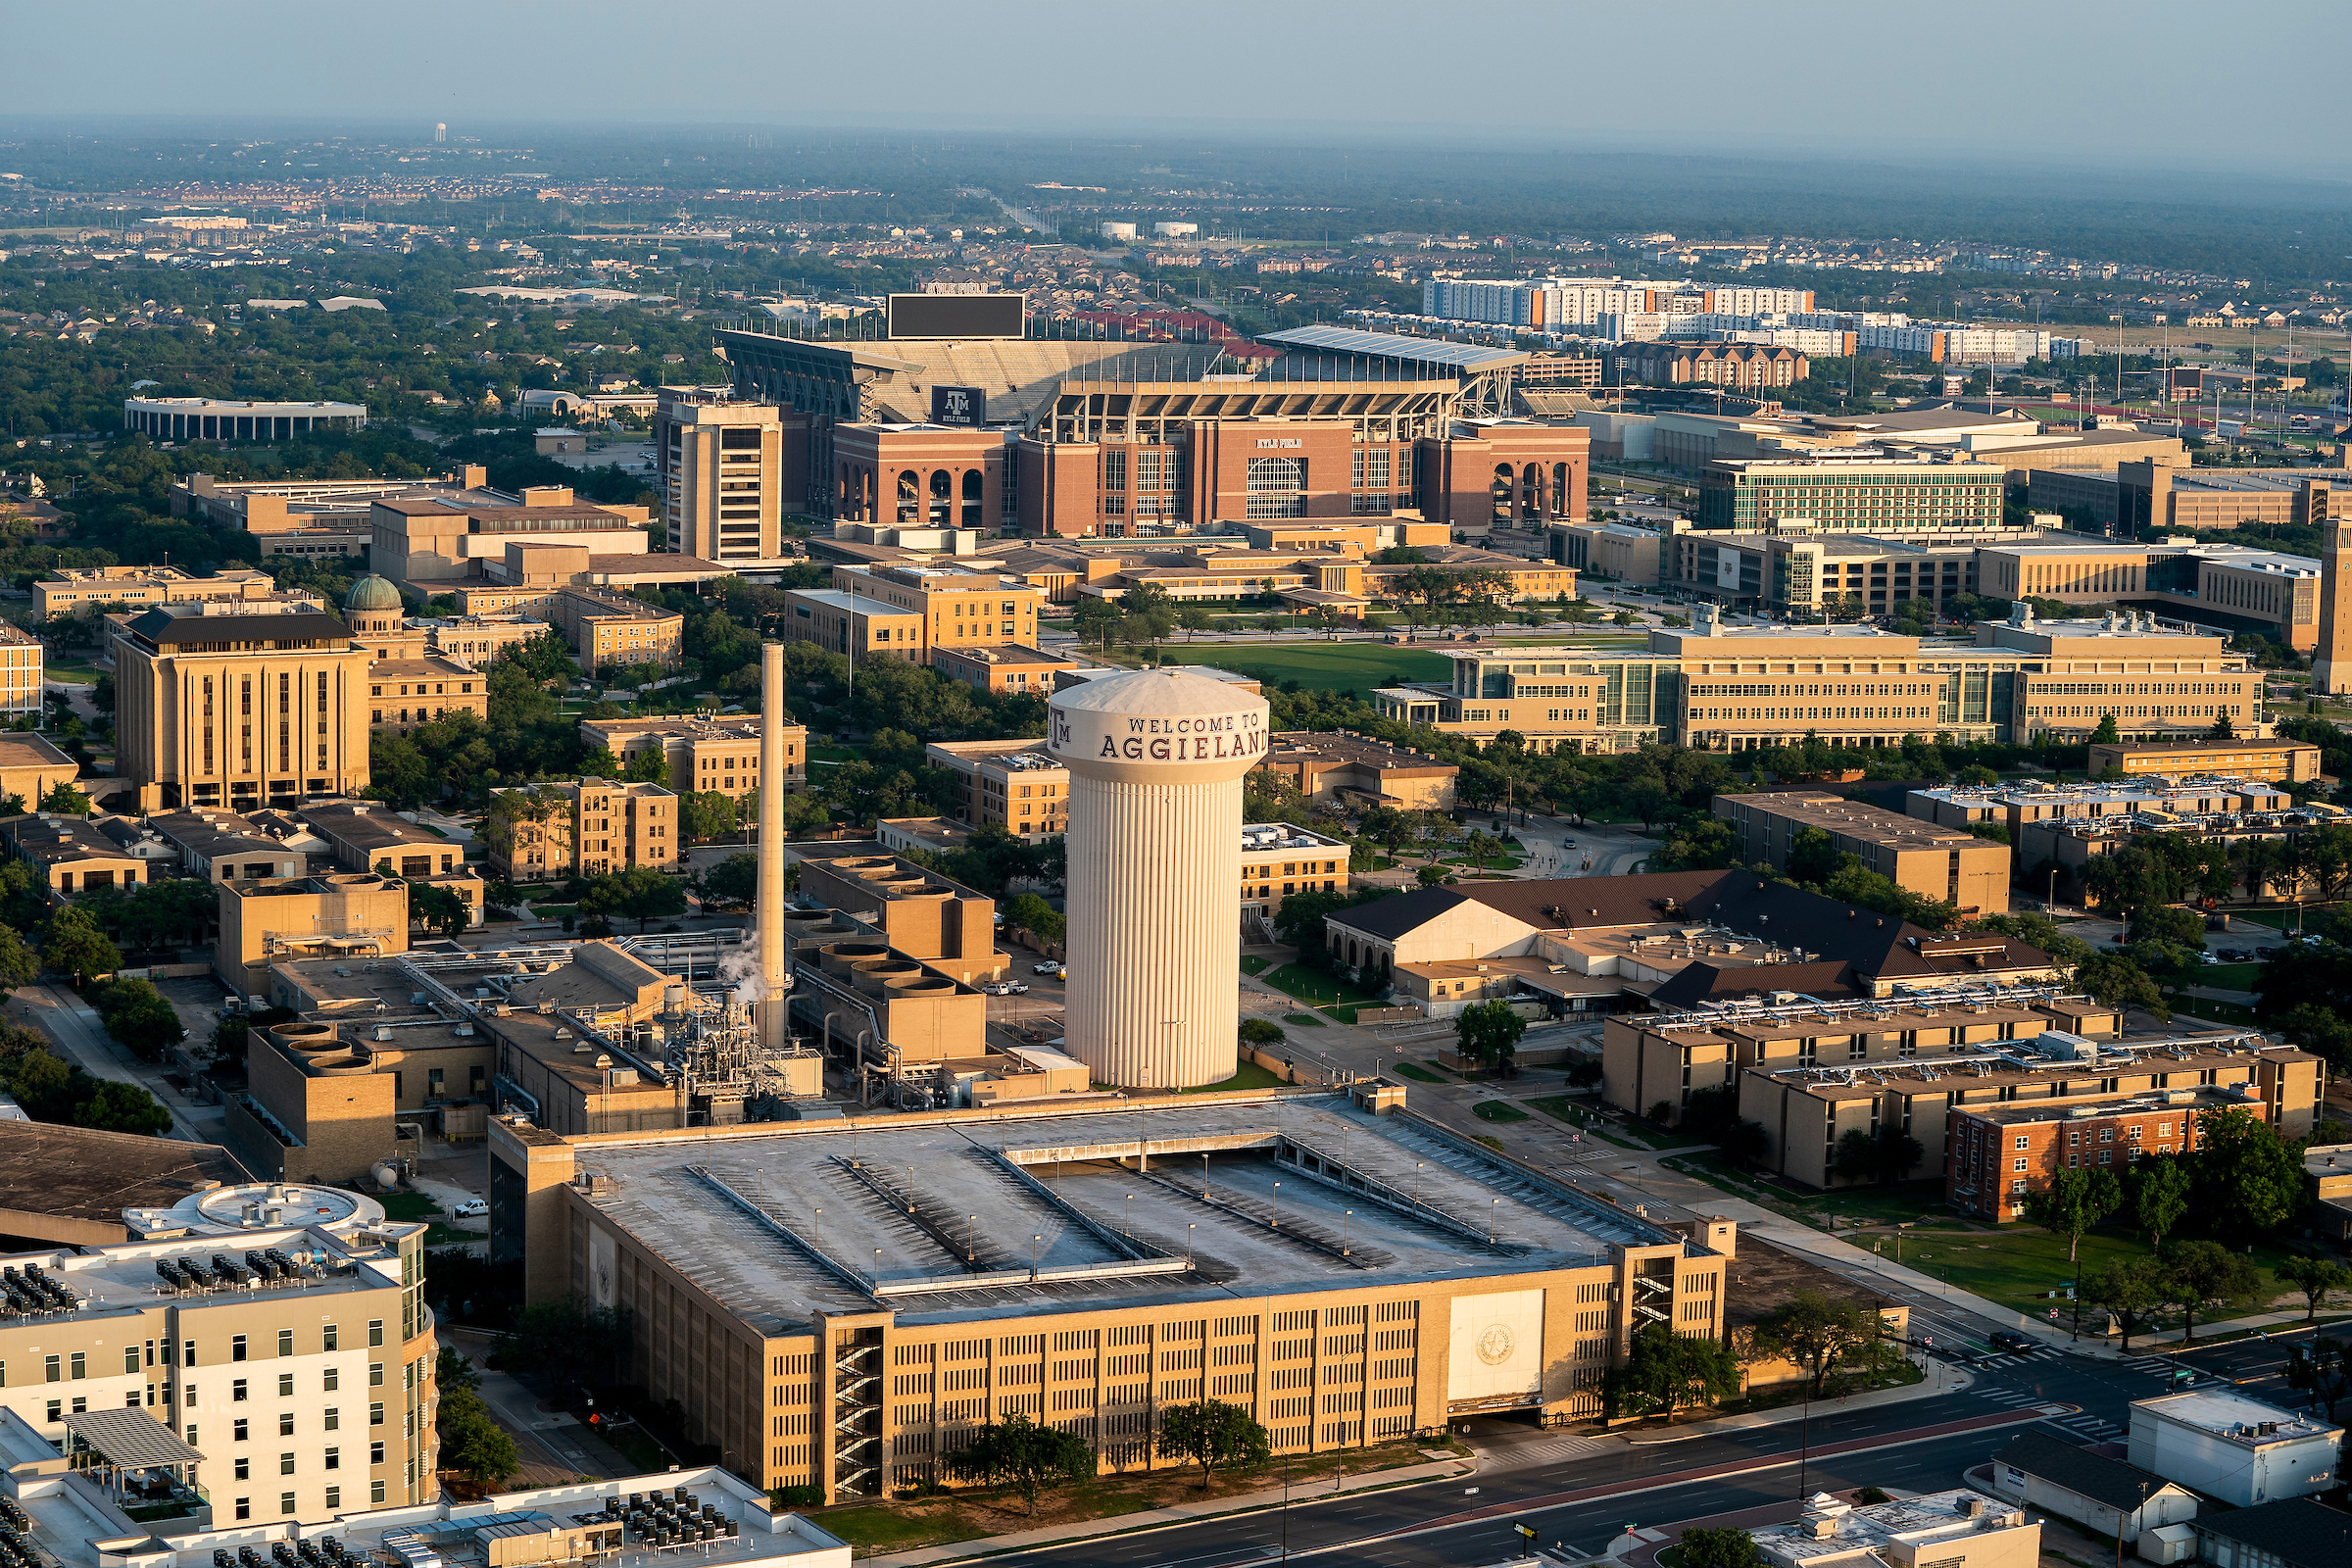 Aerial view of Texas A&M University Campus in College Station.